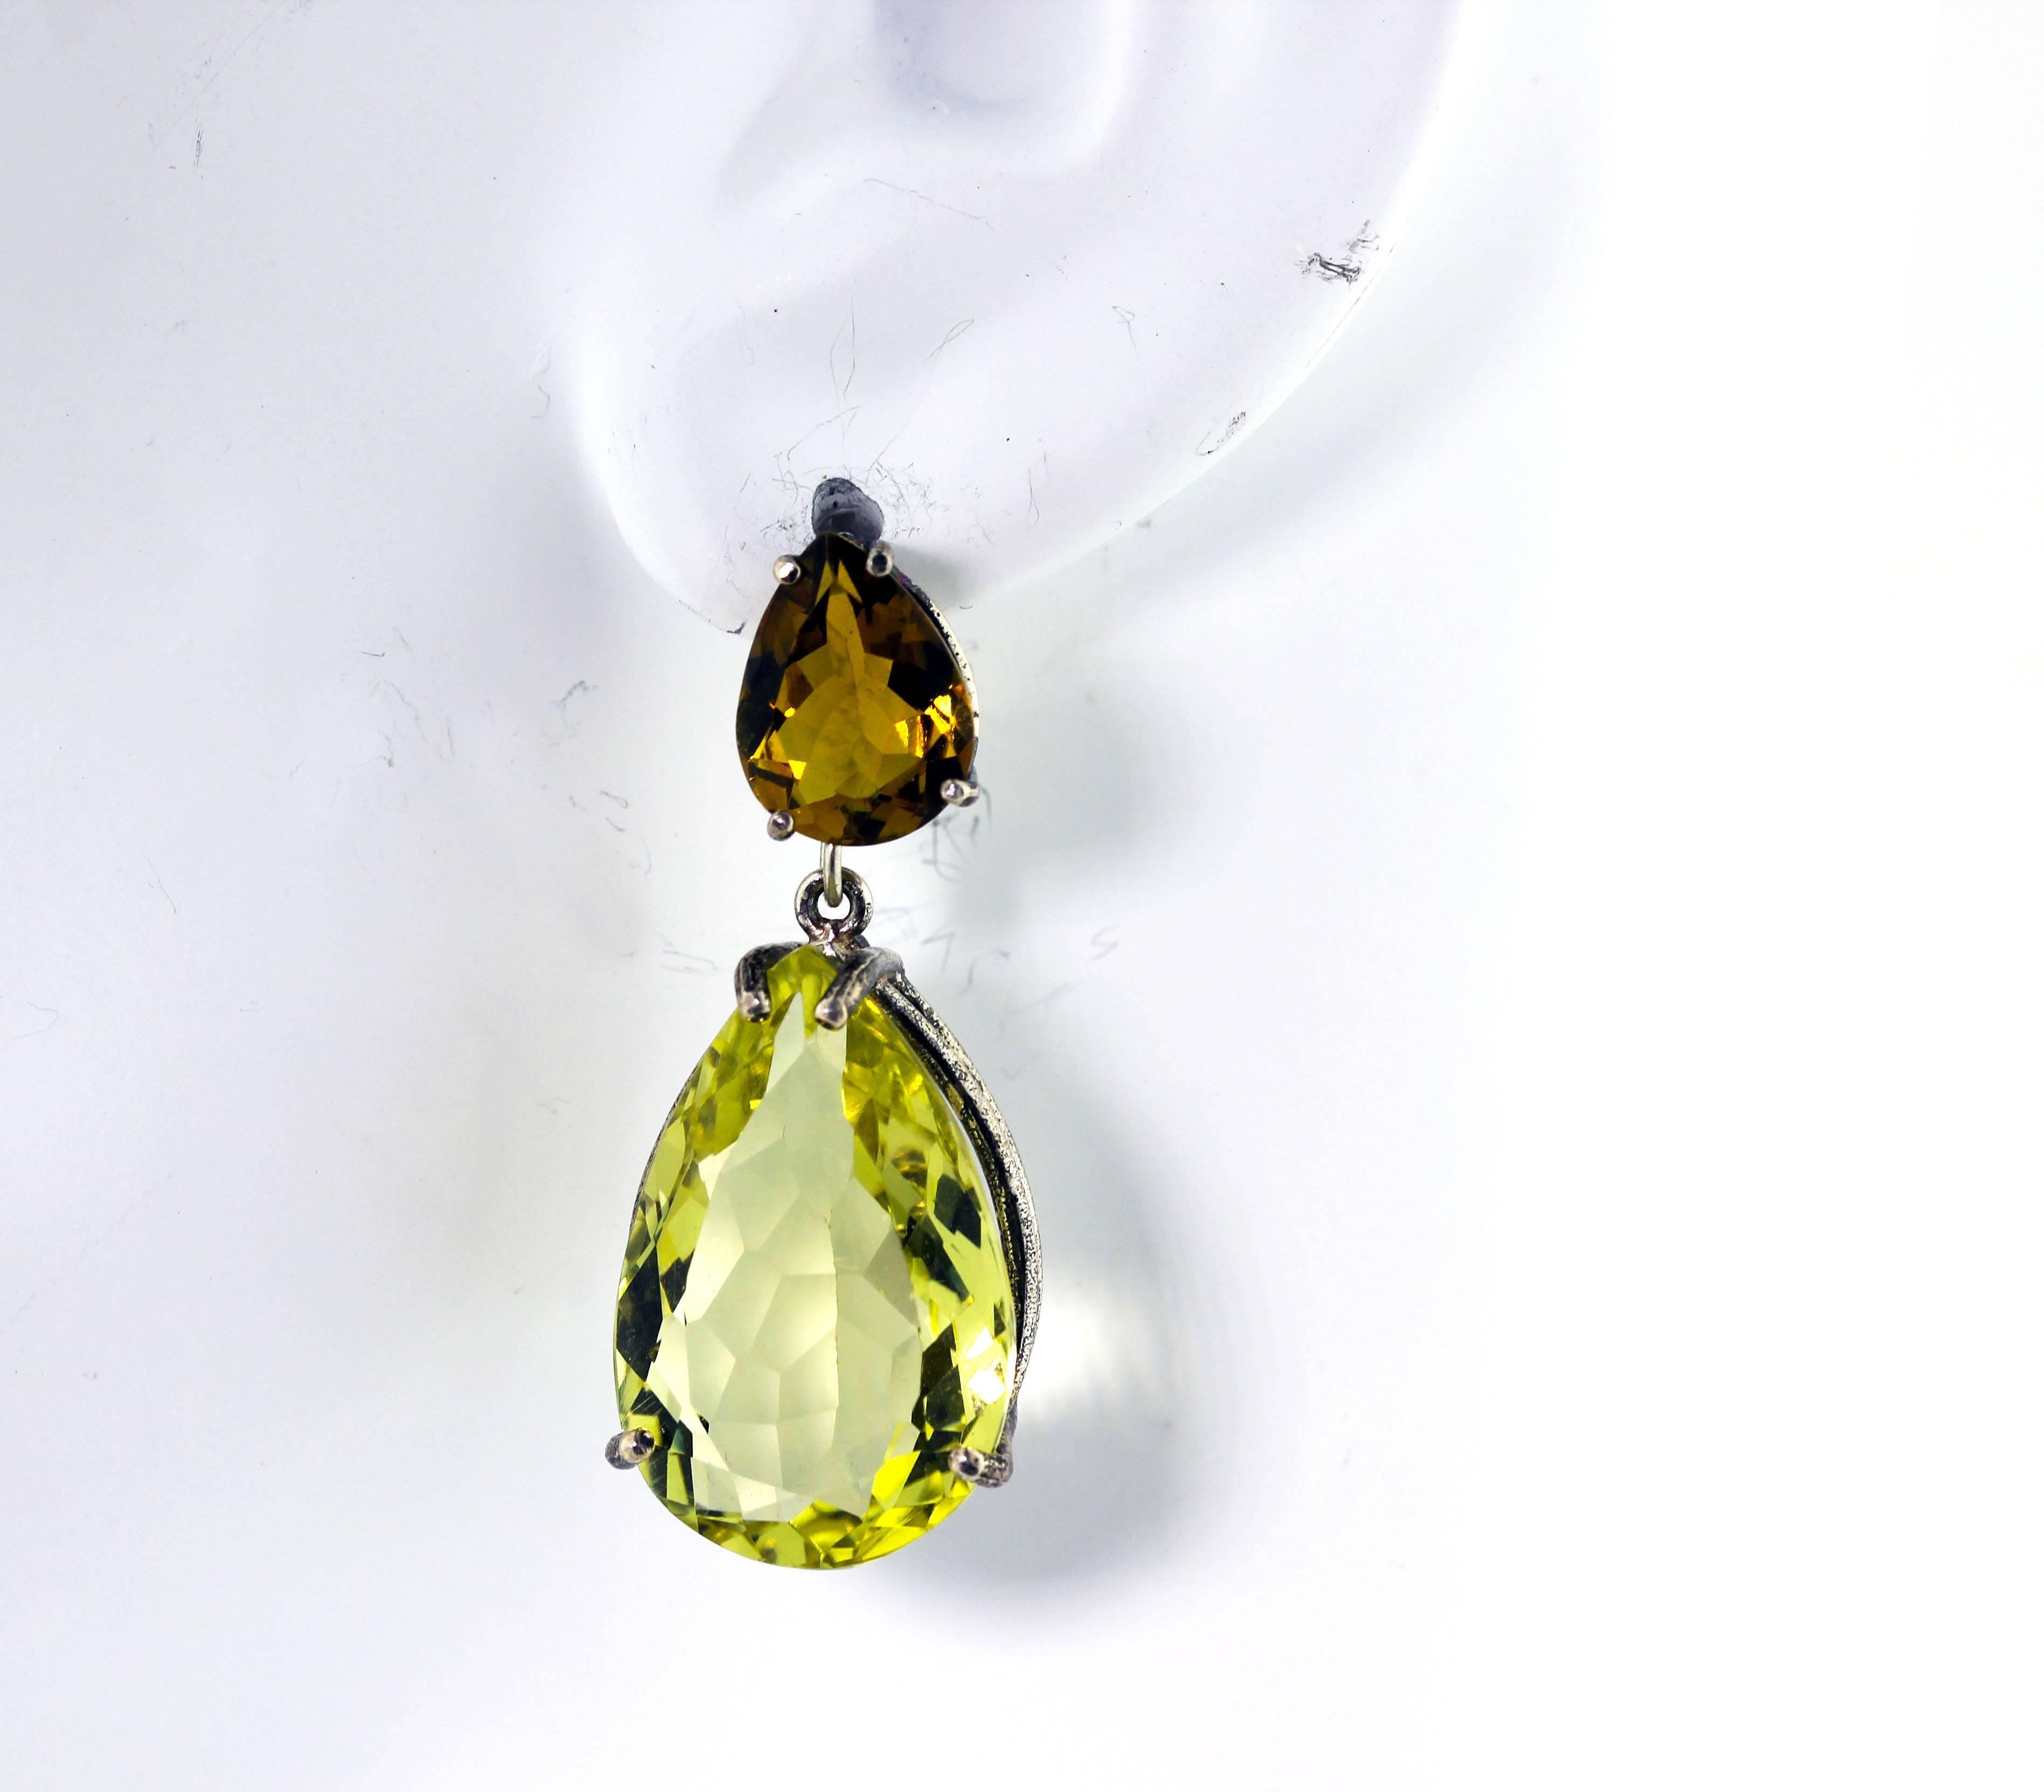 37 carats of brilliant Lemon Quartz dangle wonderfully from these 5.65 carats of glittering orangy-yellow Tourmalines set in Sterling Silver stud earrings.  They measure 1.5 inches long.